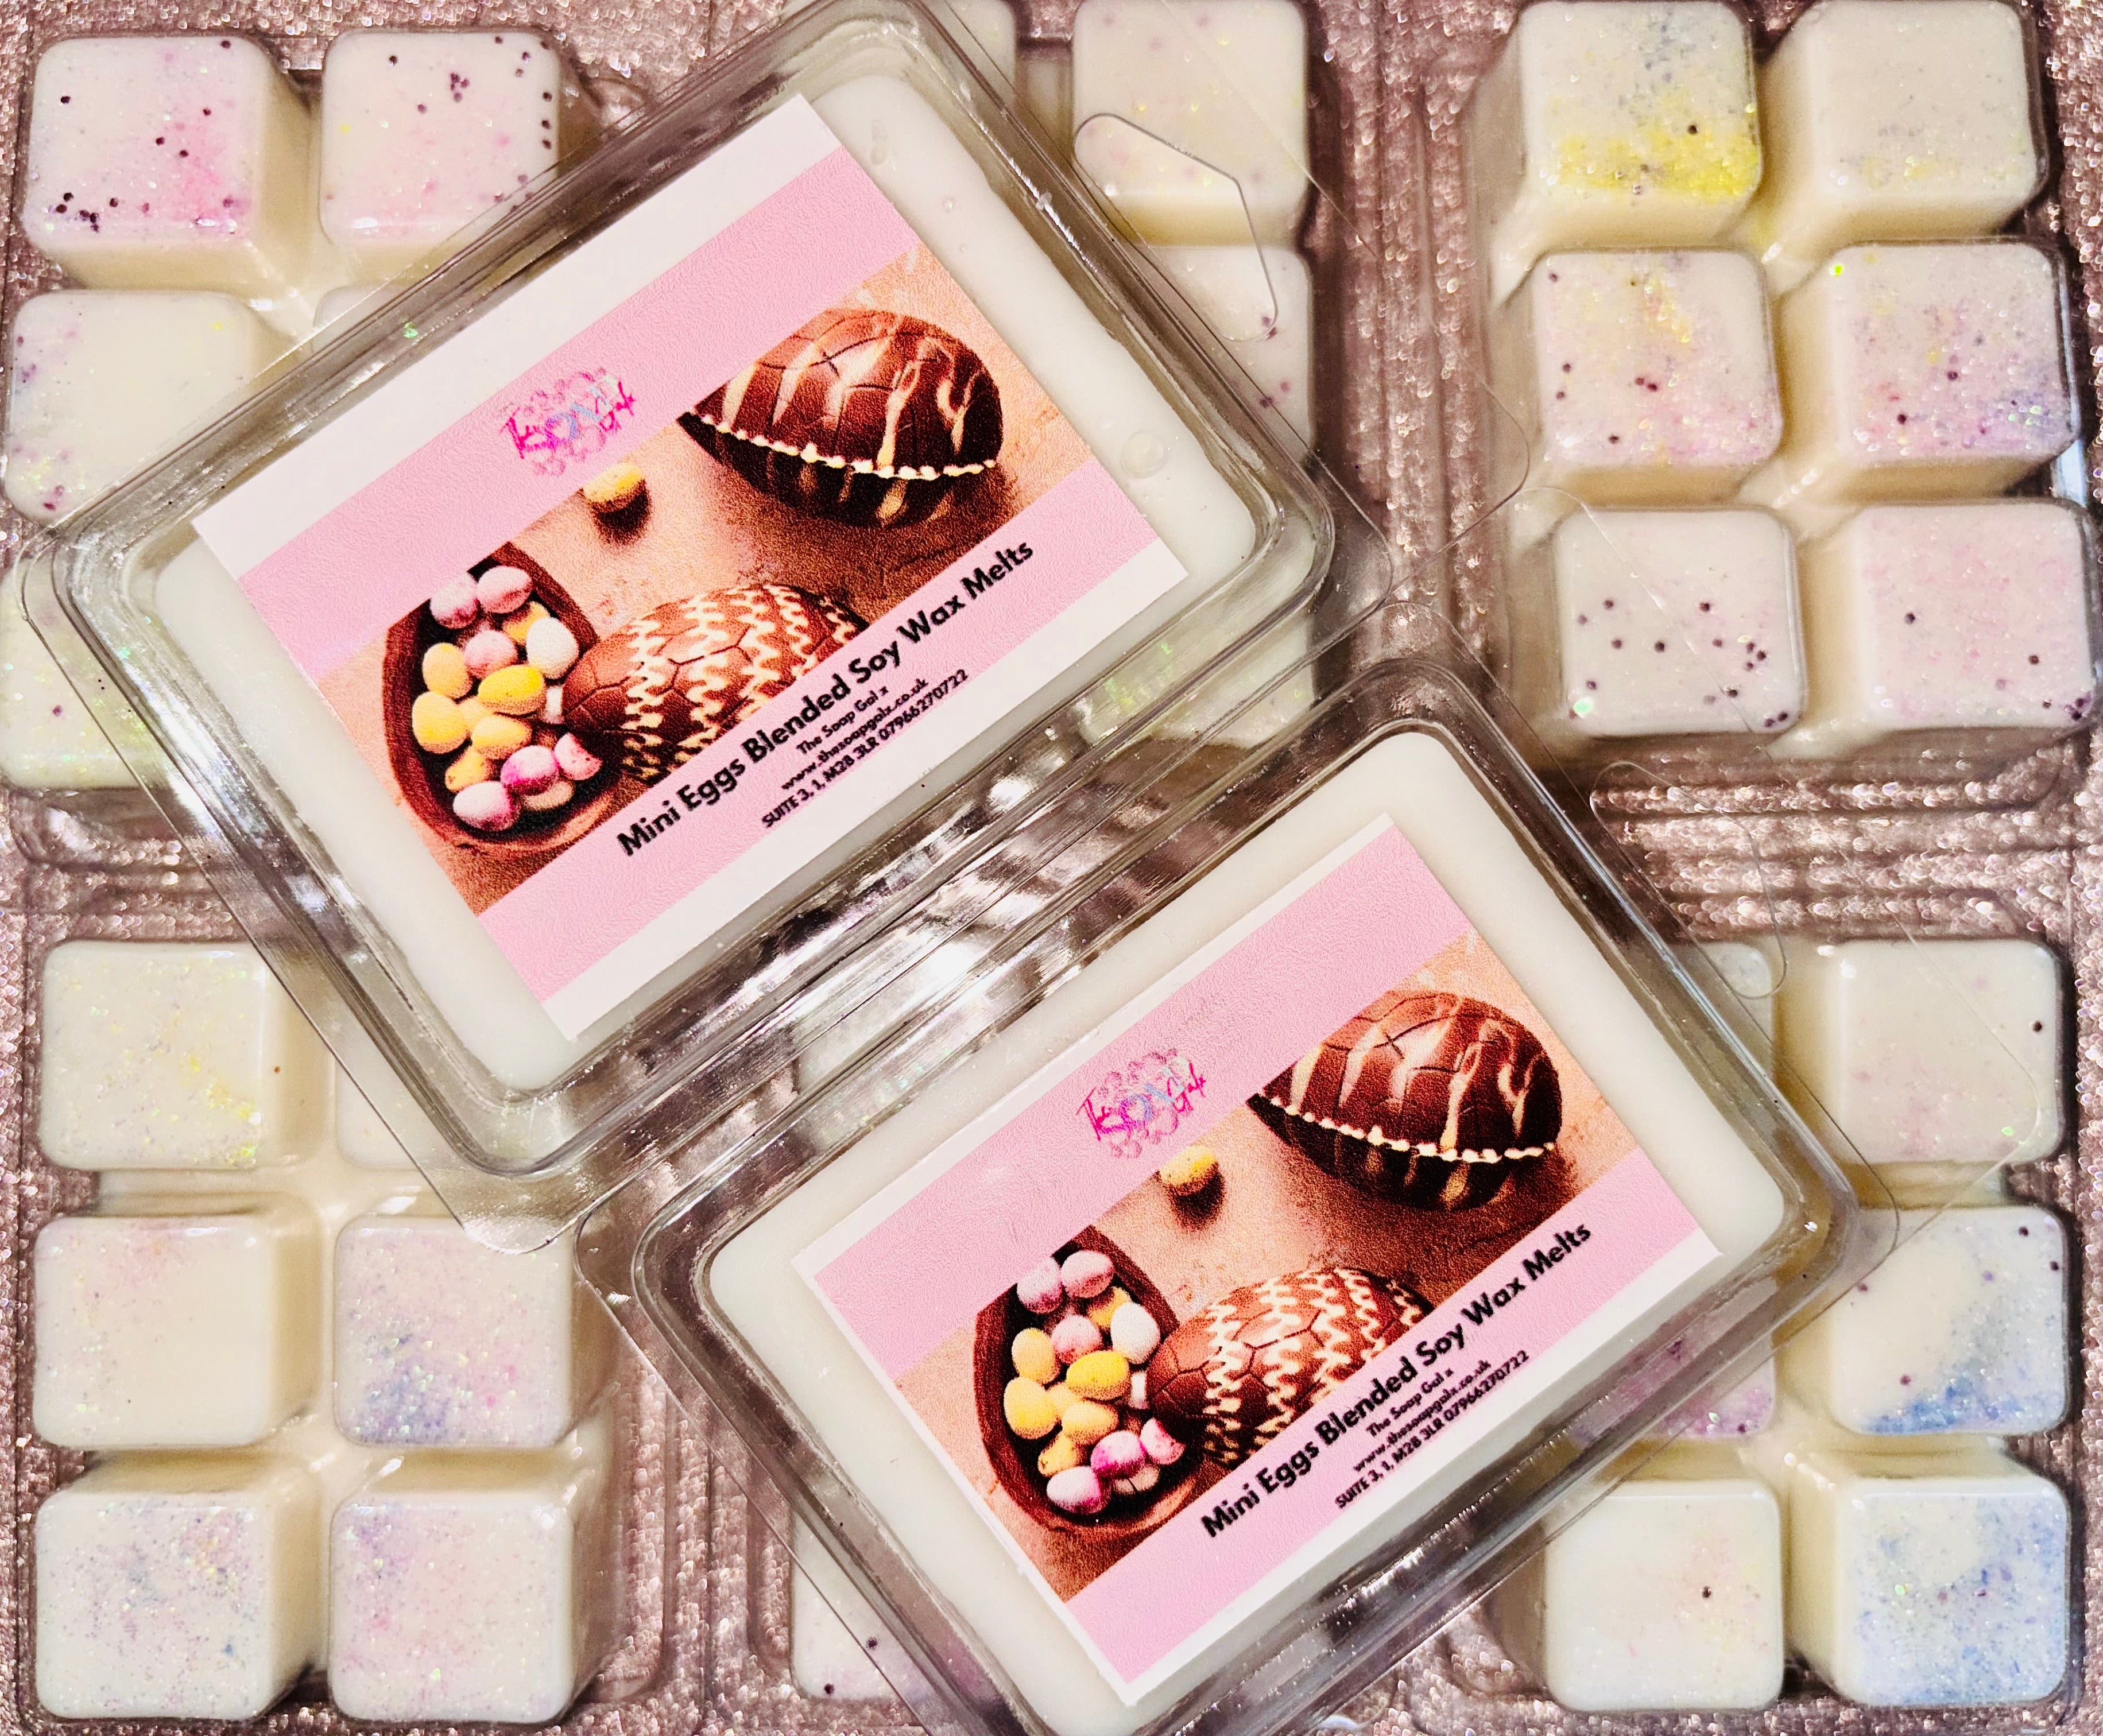 A box of Chocolate Egg Easter scented wax melts from The Soap Gal x on top of a pink plate.